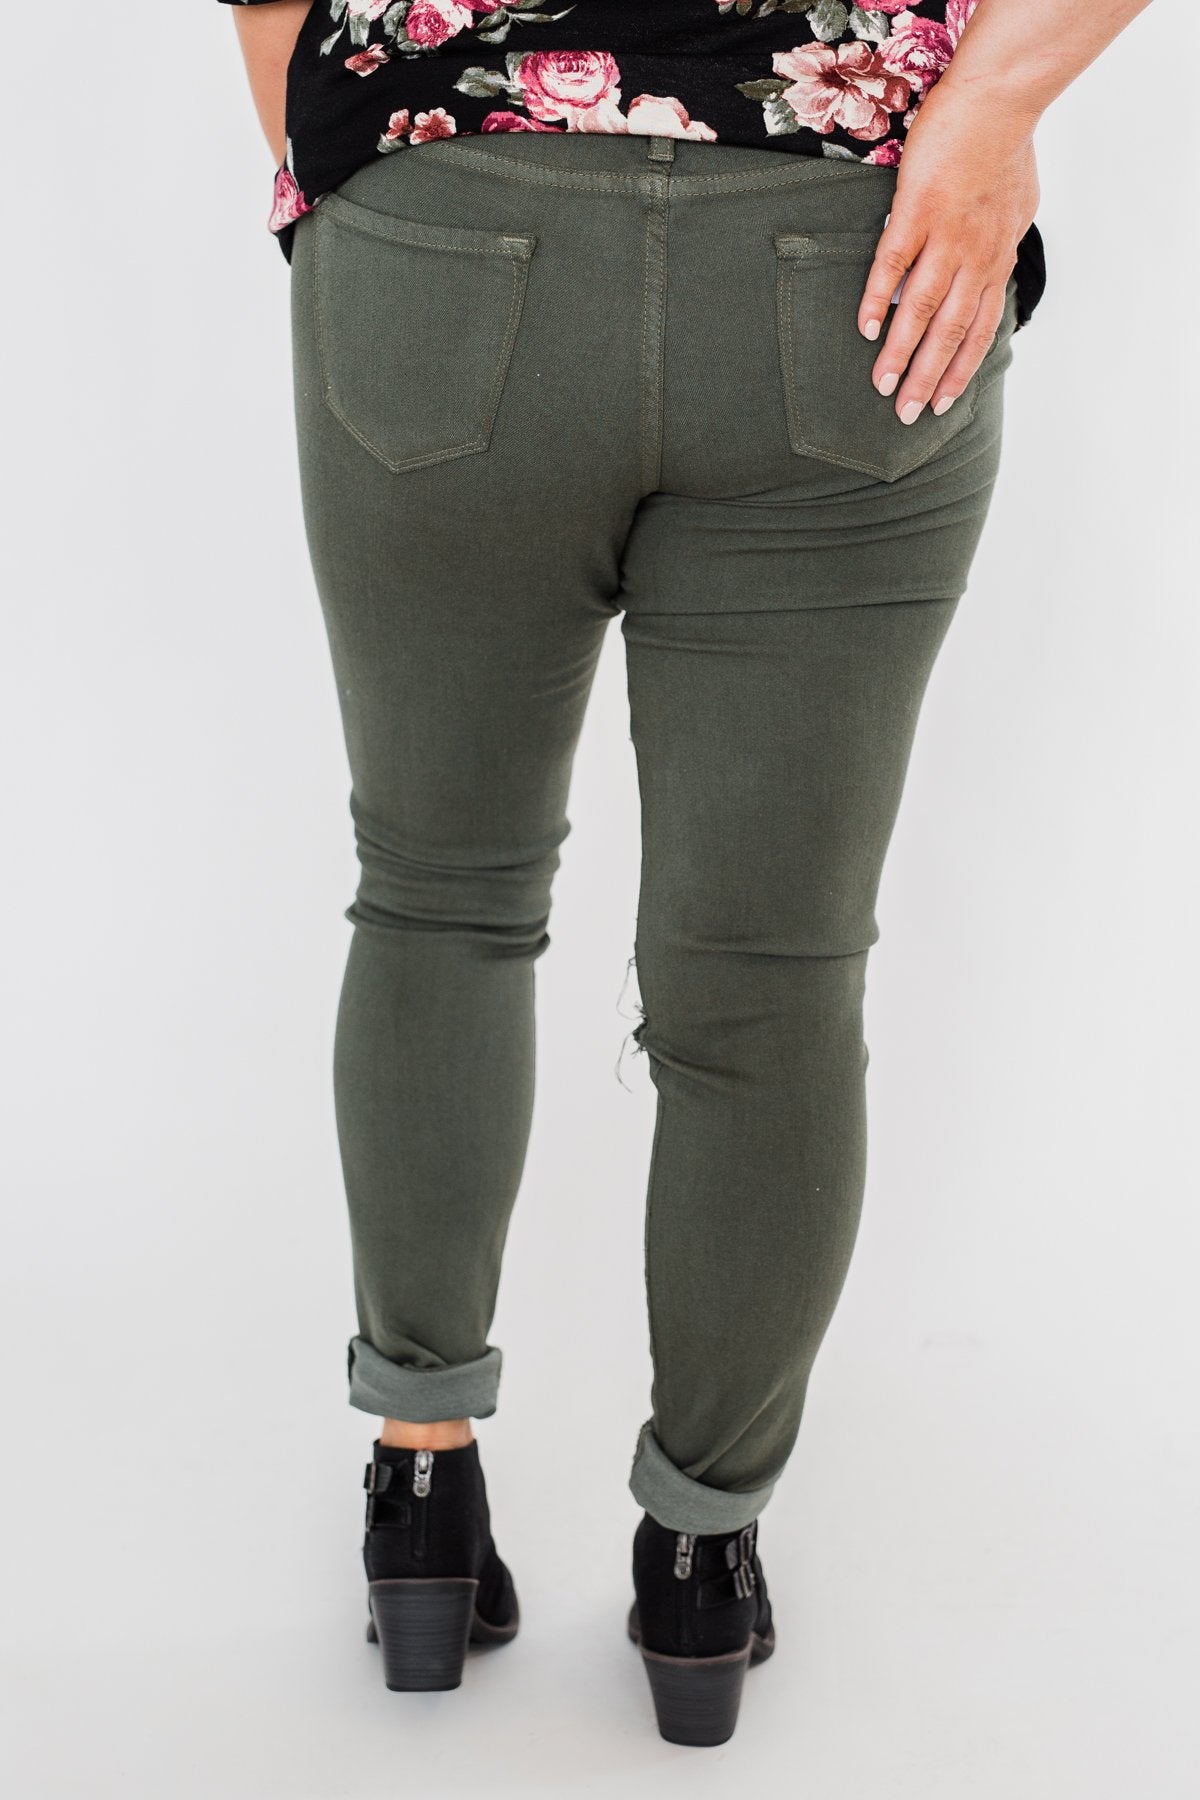 distressed olive green jeans